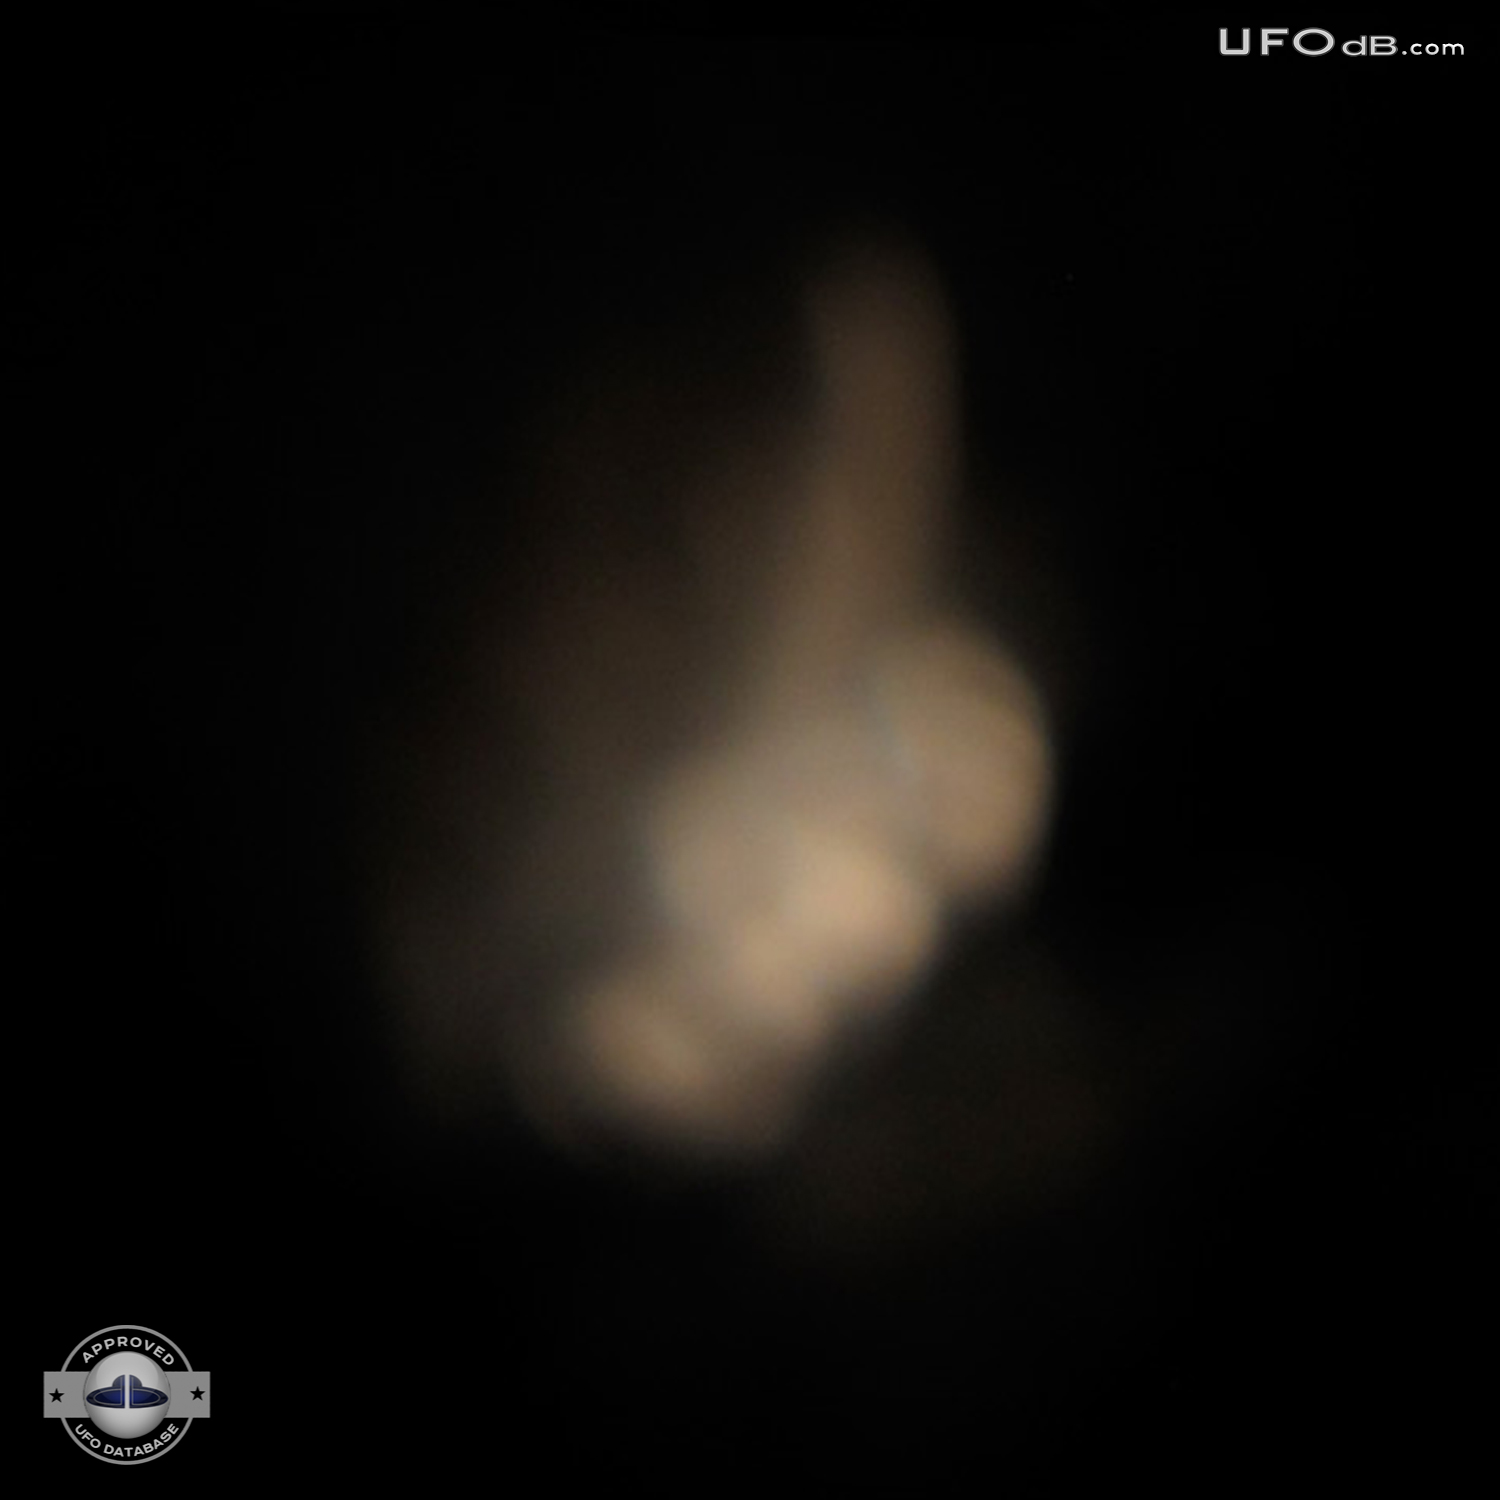 Pine Creek Campers see two UFOs on same night | Colorado | May 8 2011 UFO Picture #294-3